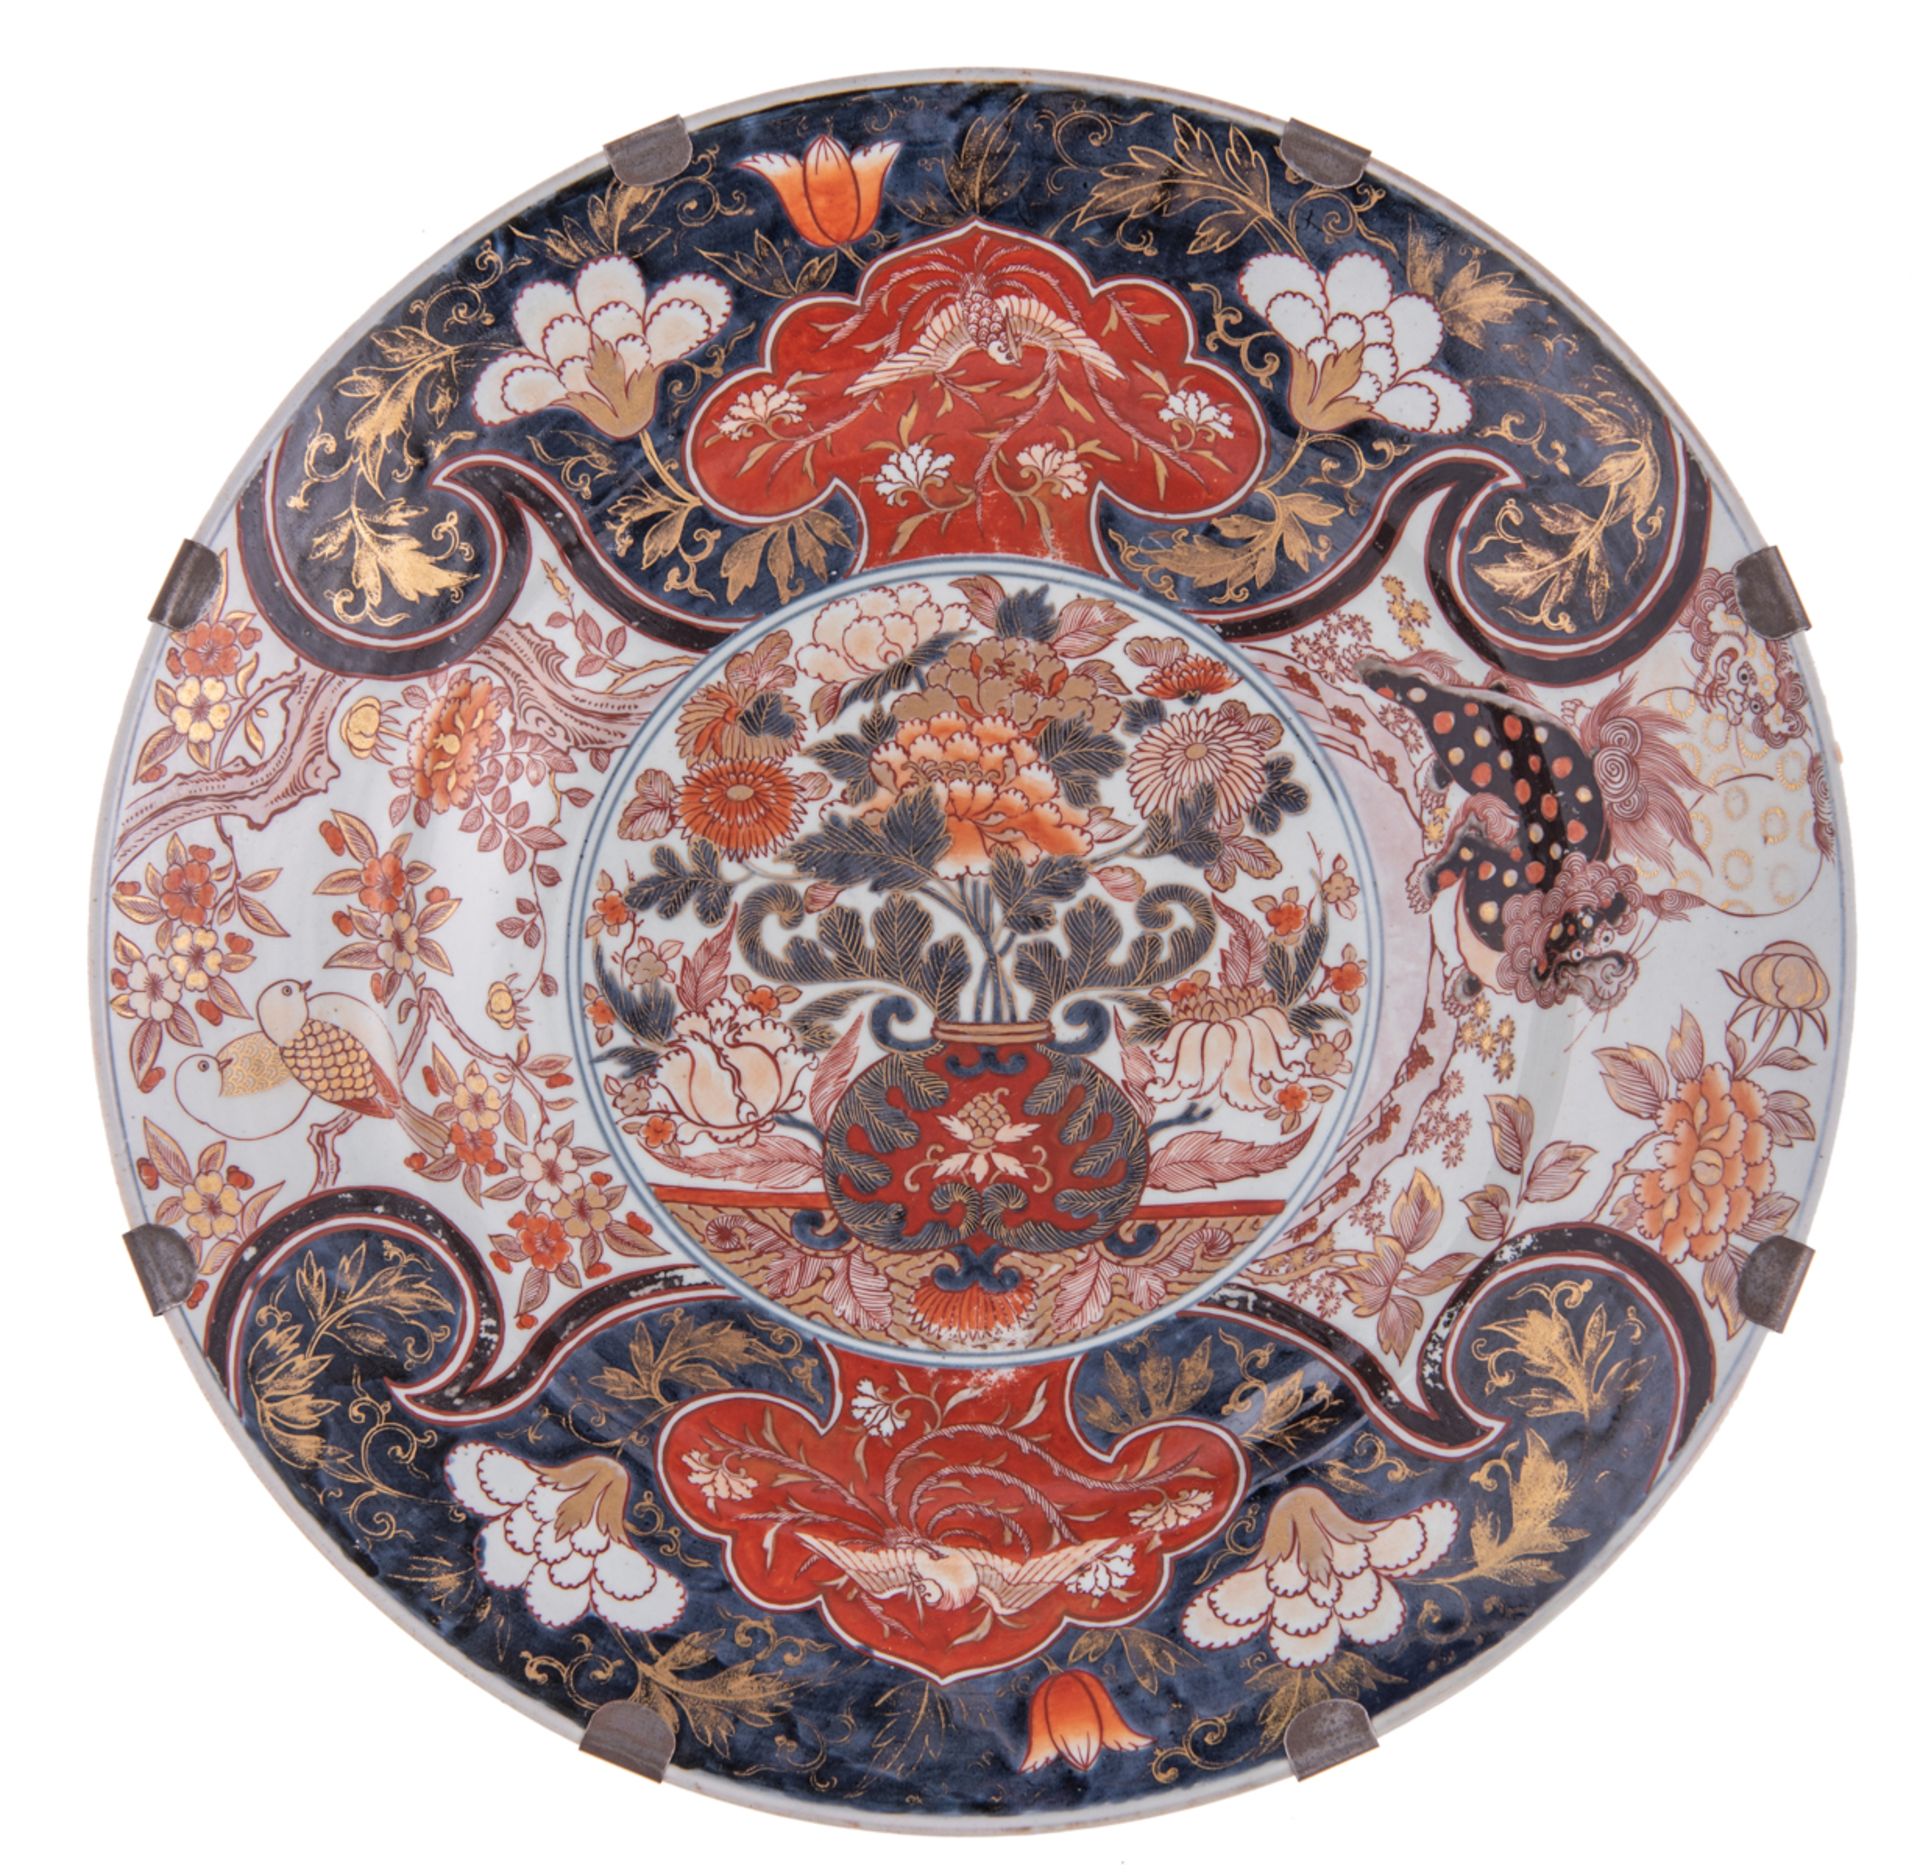 A large Imari Edo period plate, central decorated with a flower basket, the rim with birds and Shi-S